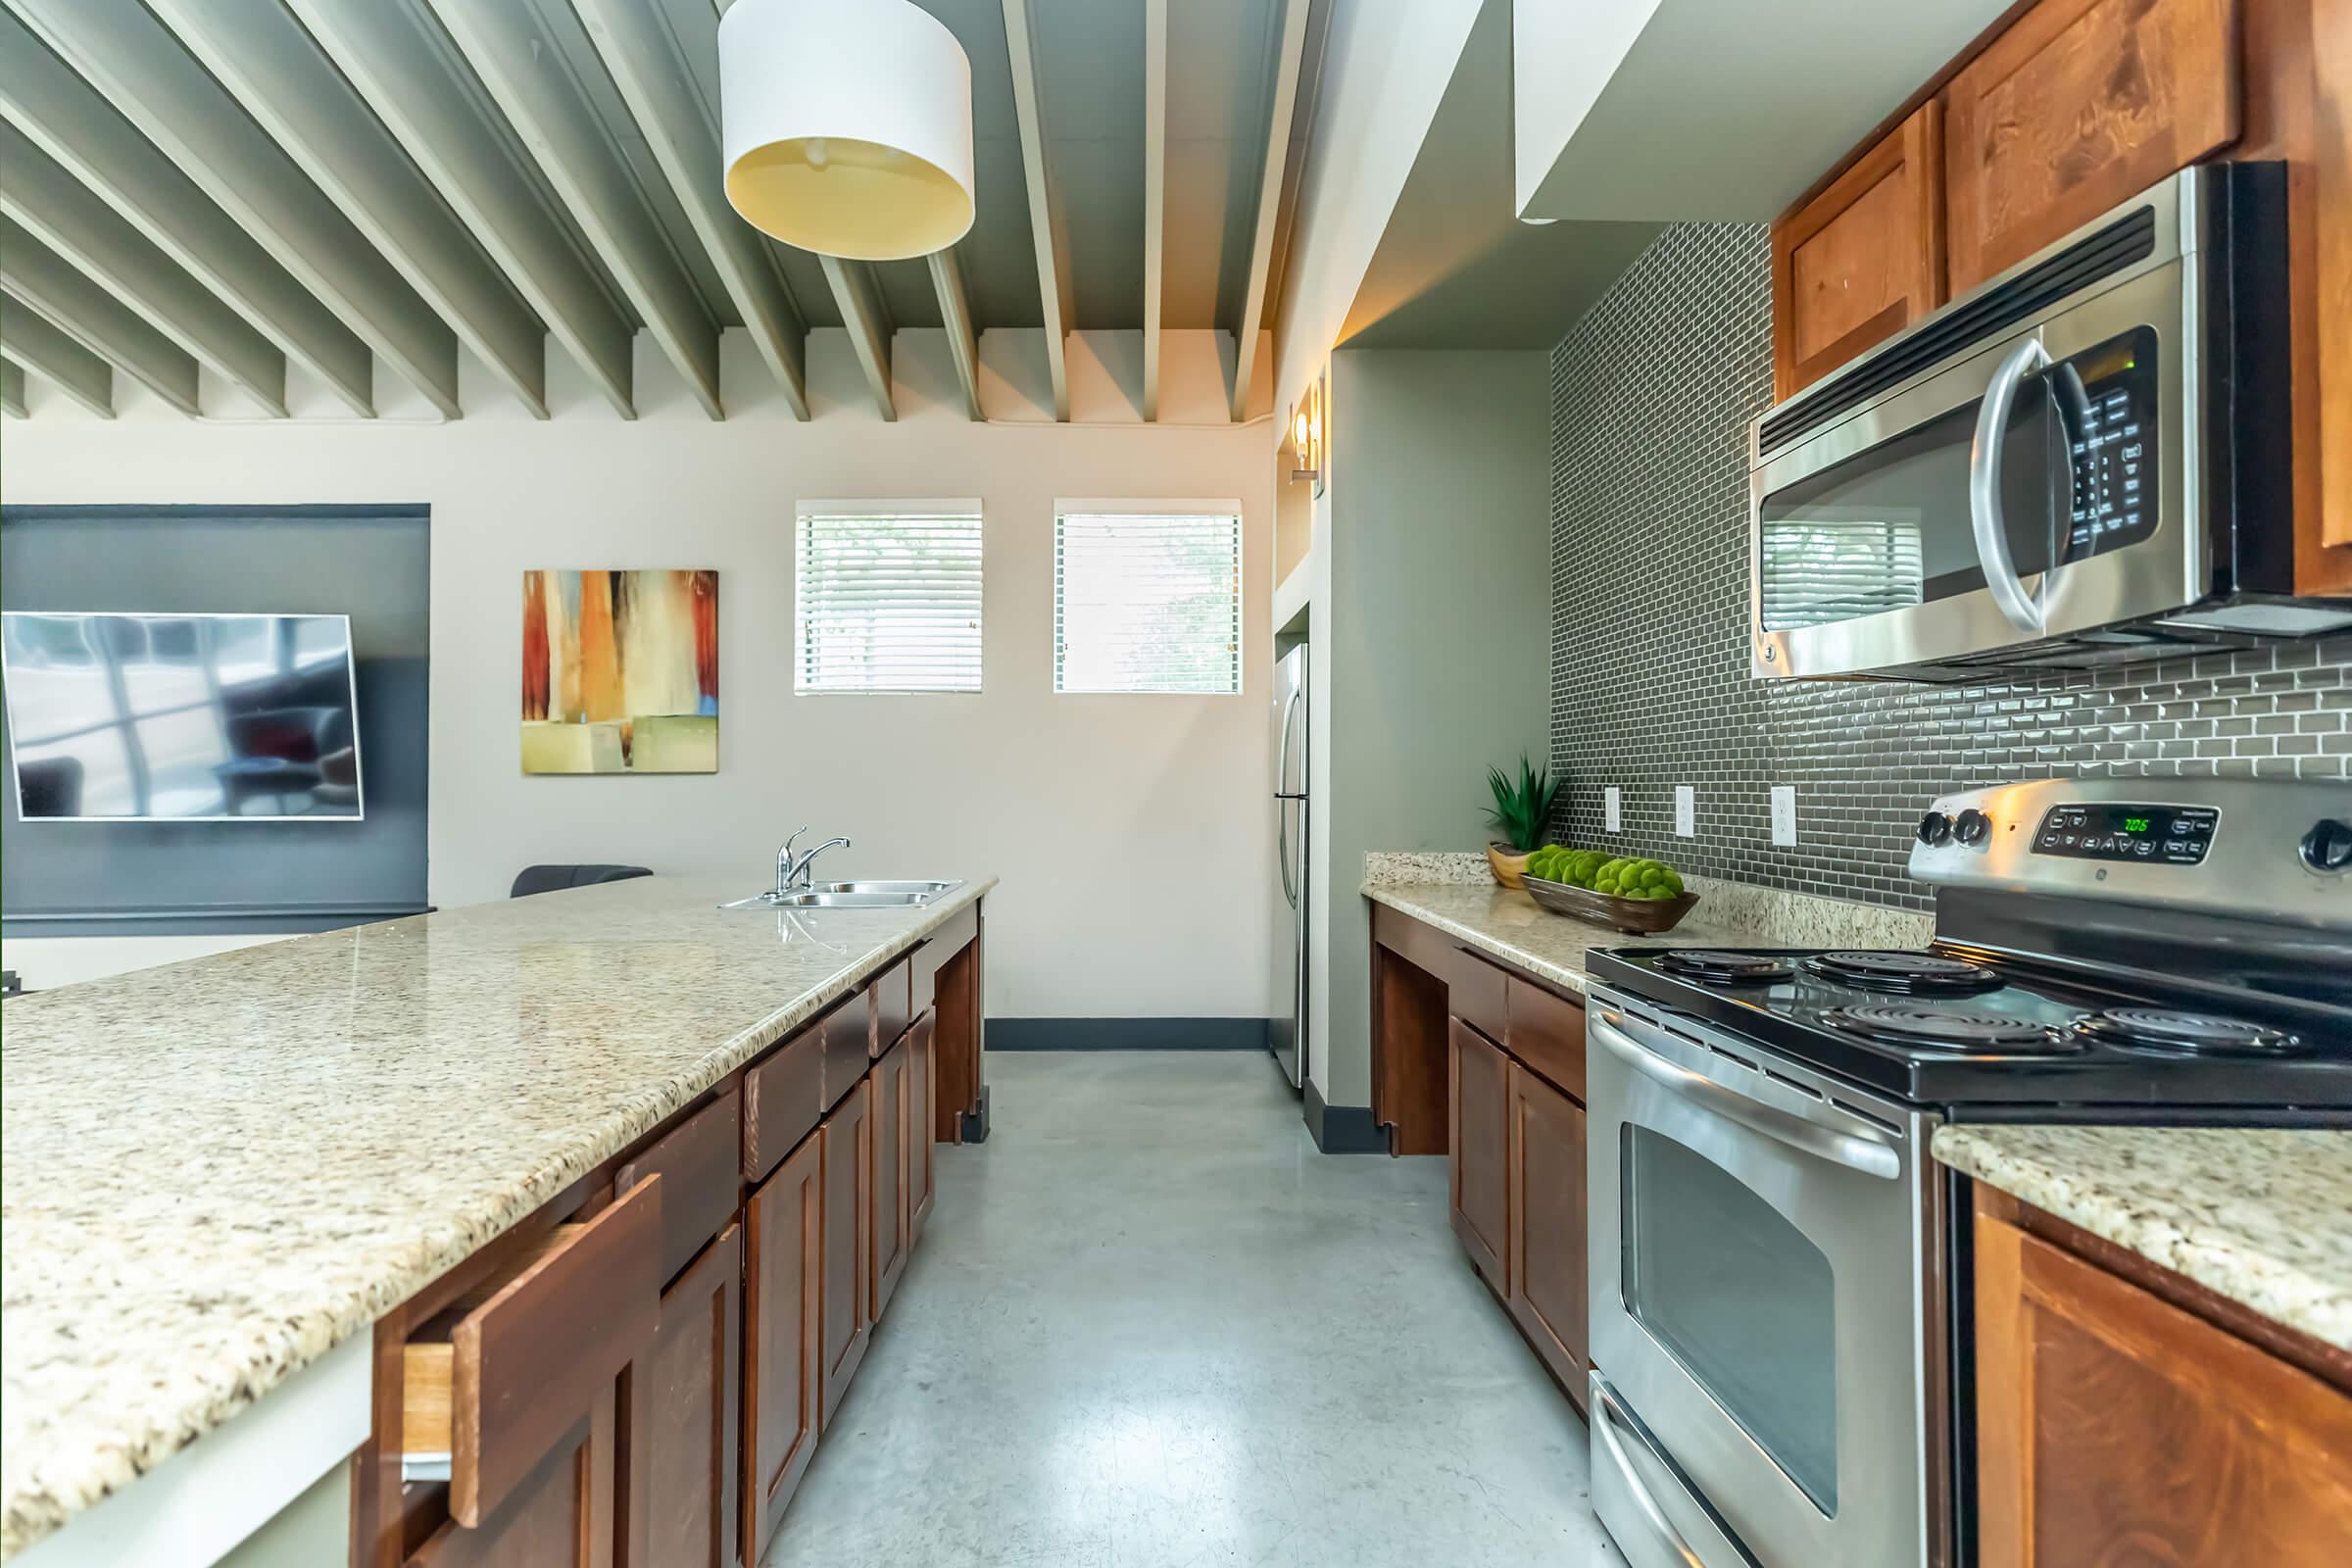 community kitchen with stainless steel appliances